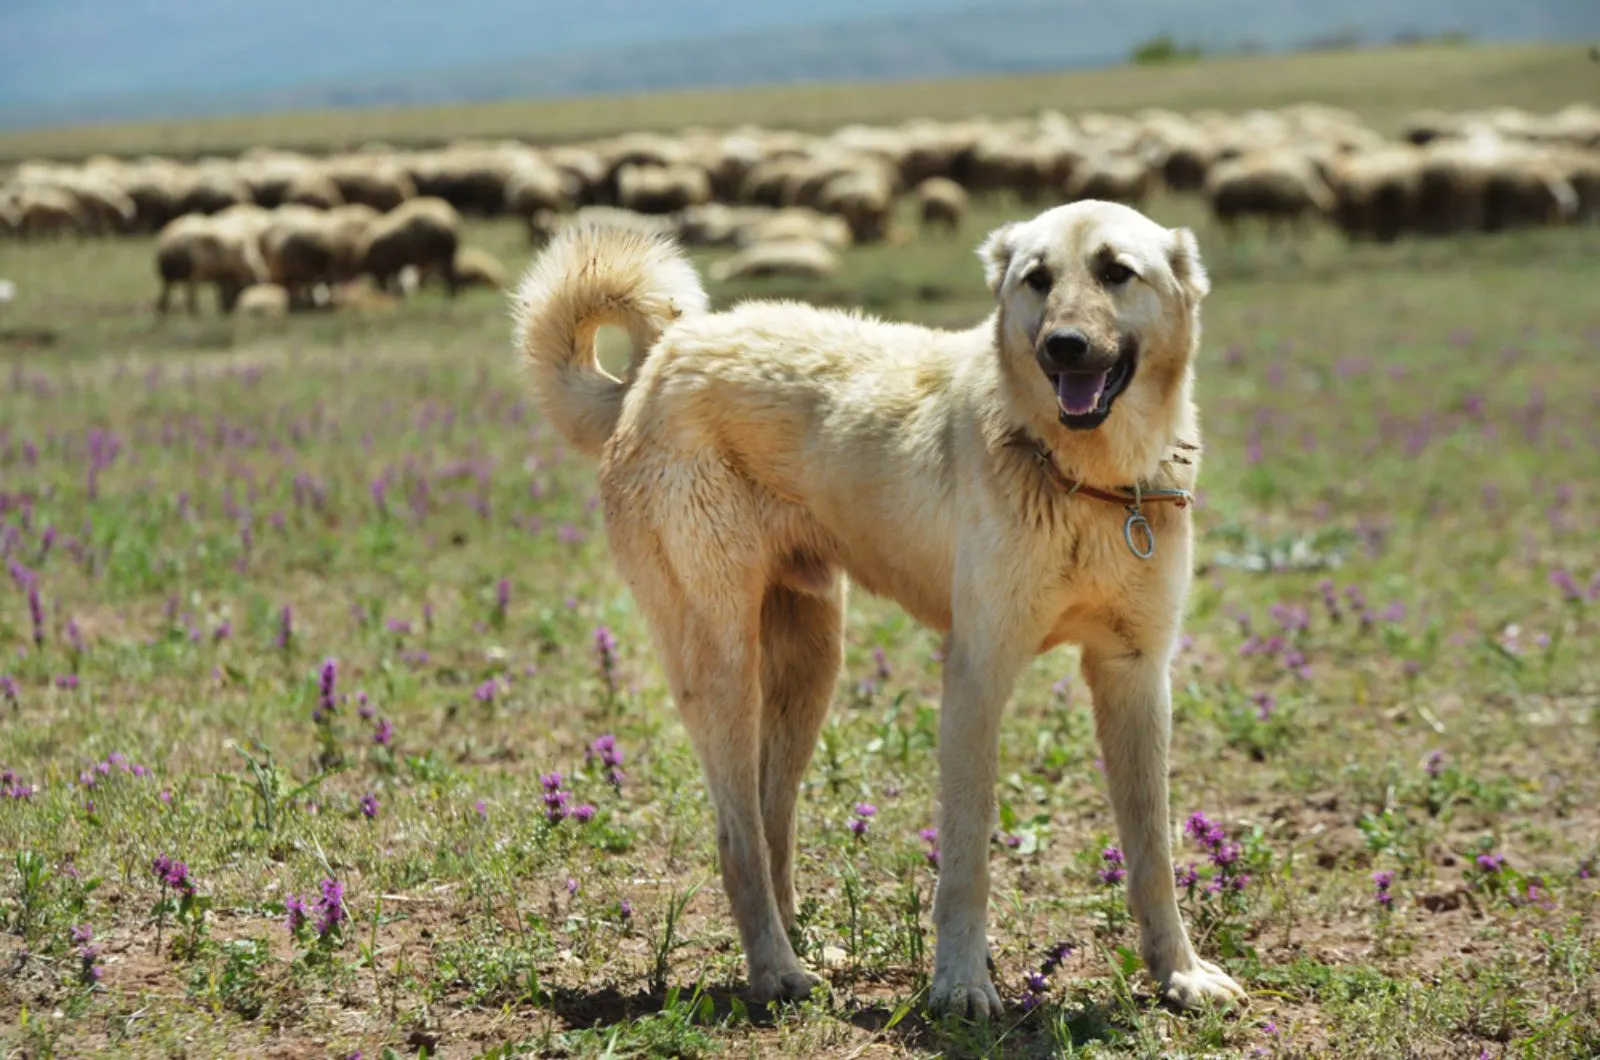 kangal dog standing on a meadow in front of sheep